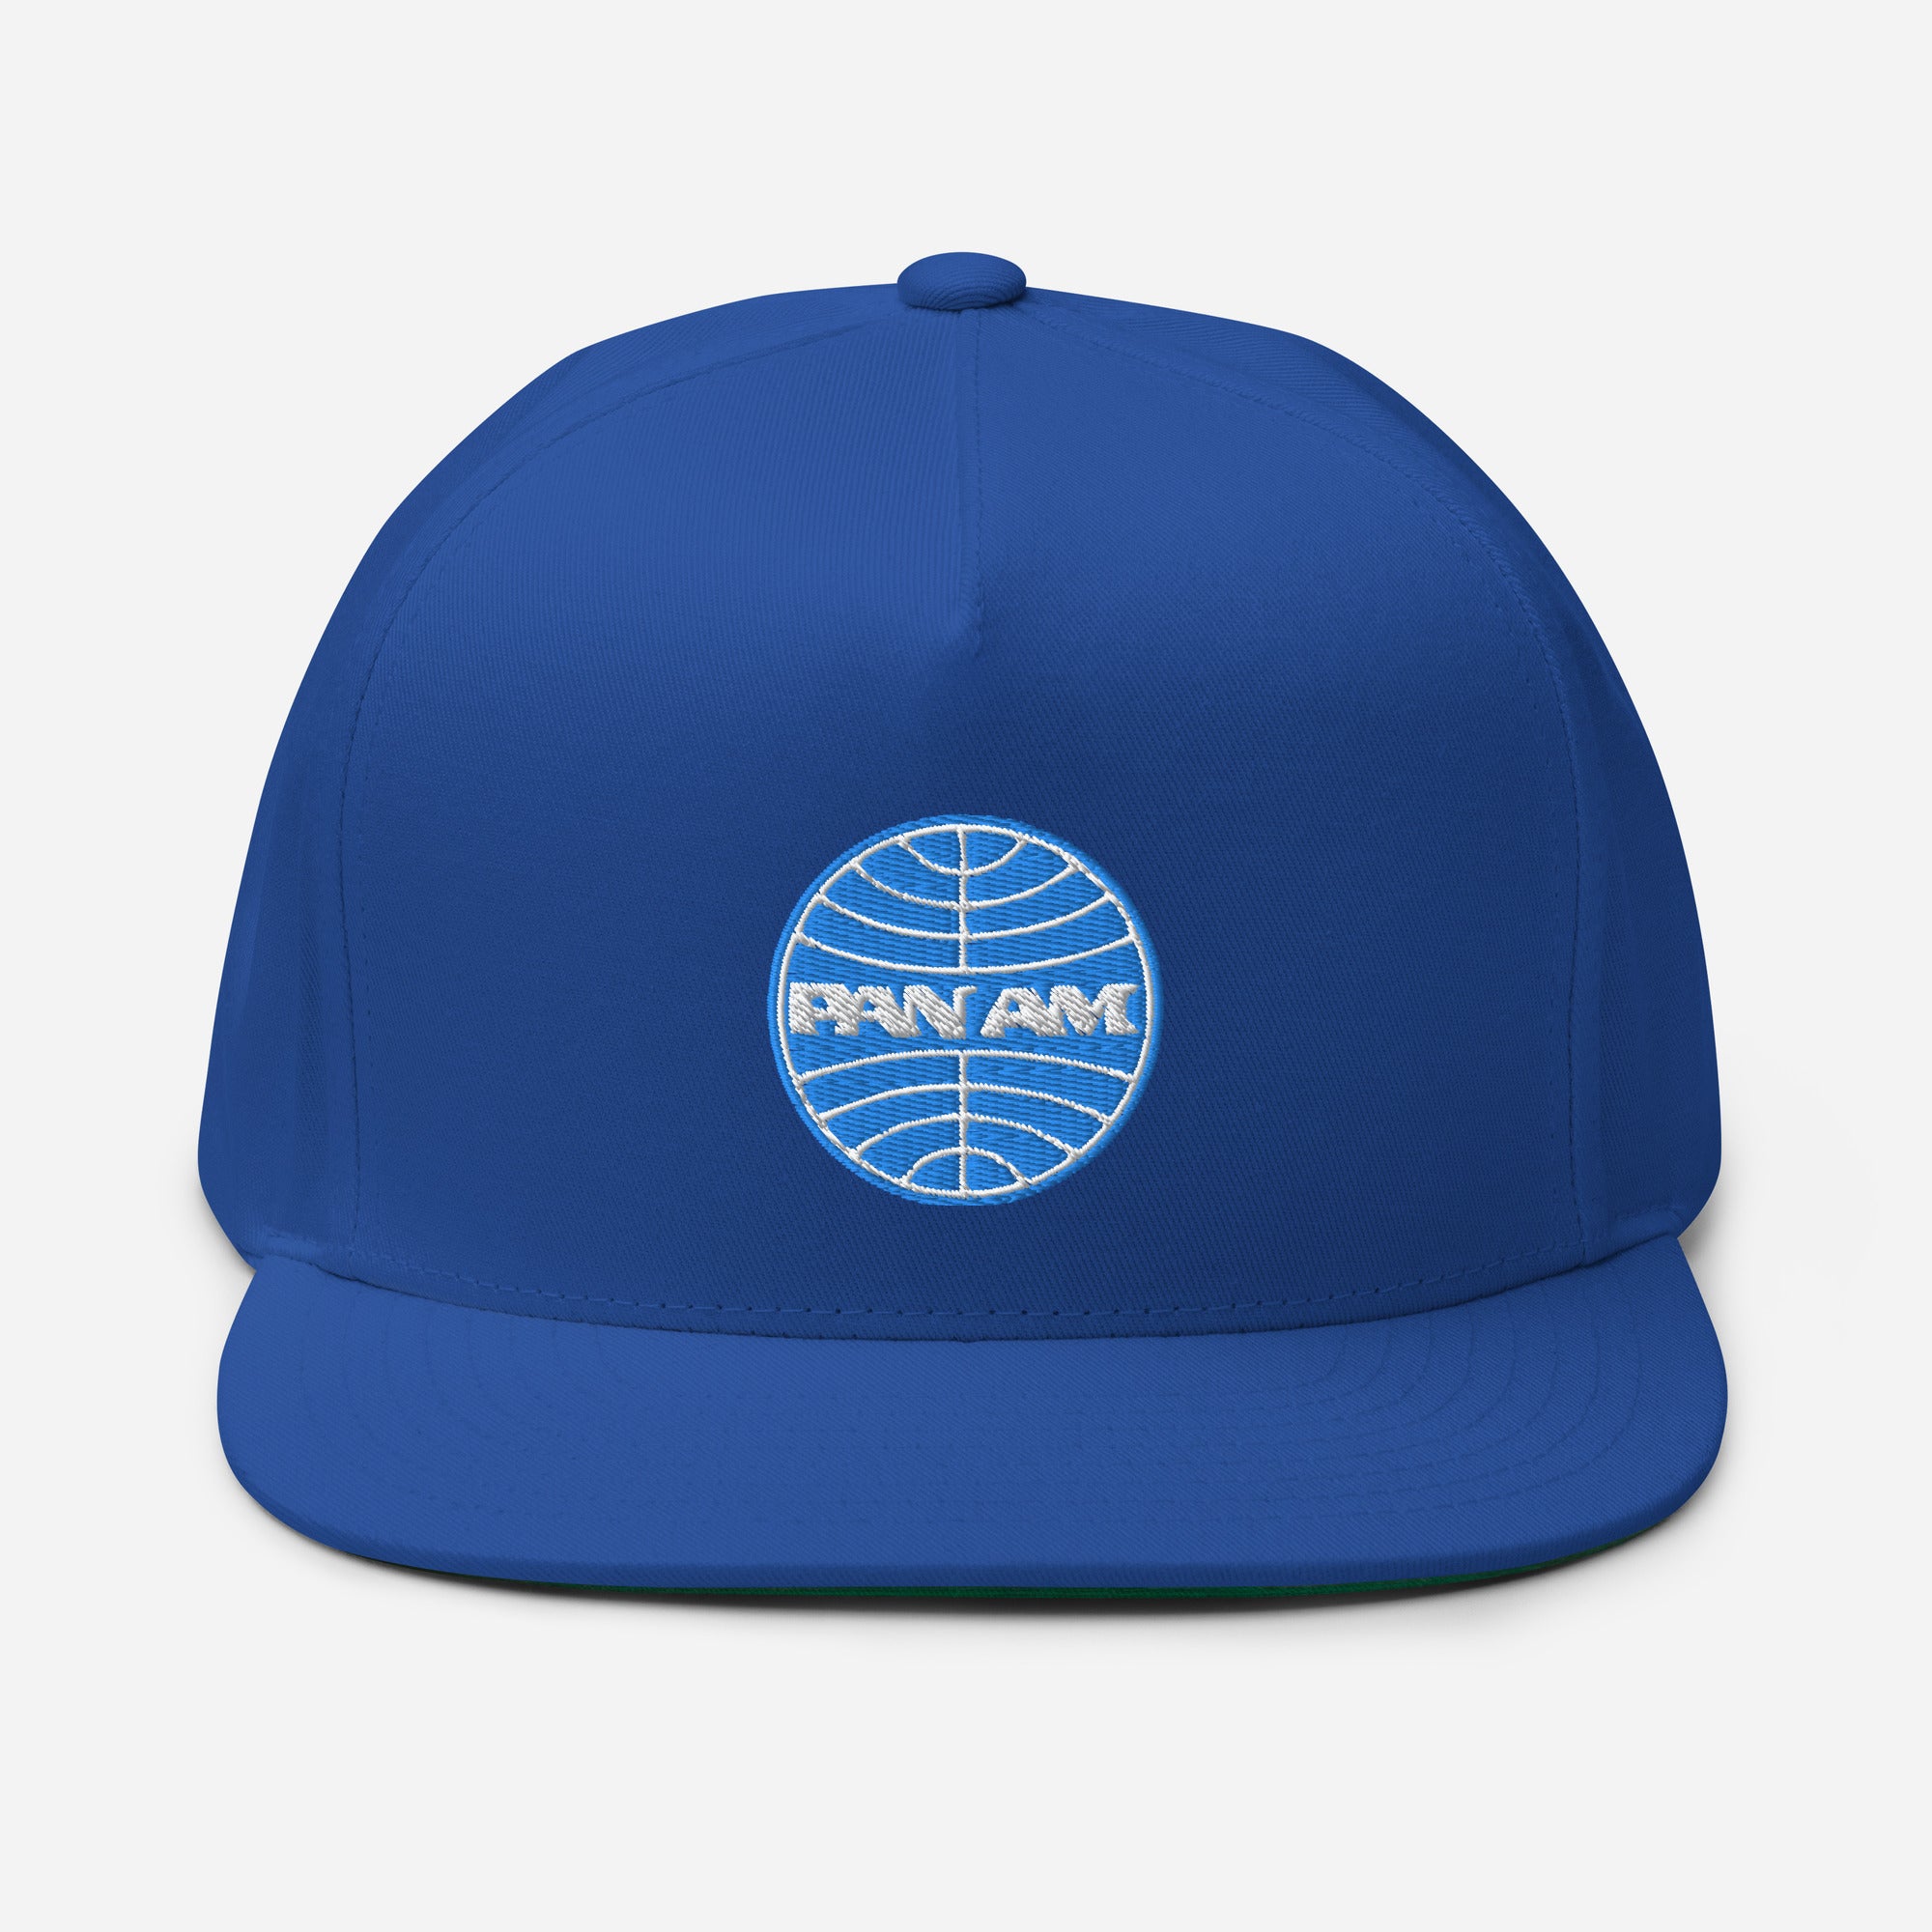 Pan Am Embroidered Cap